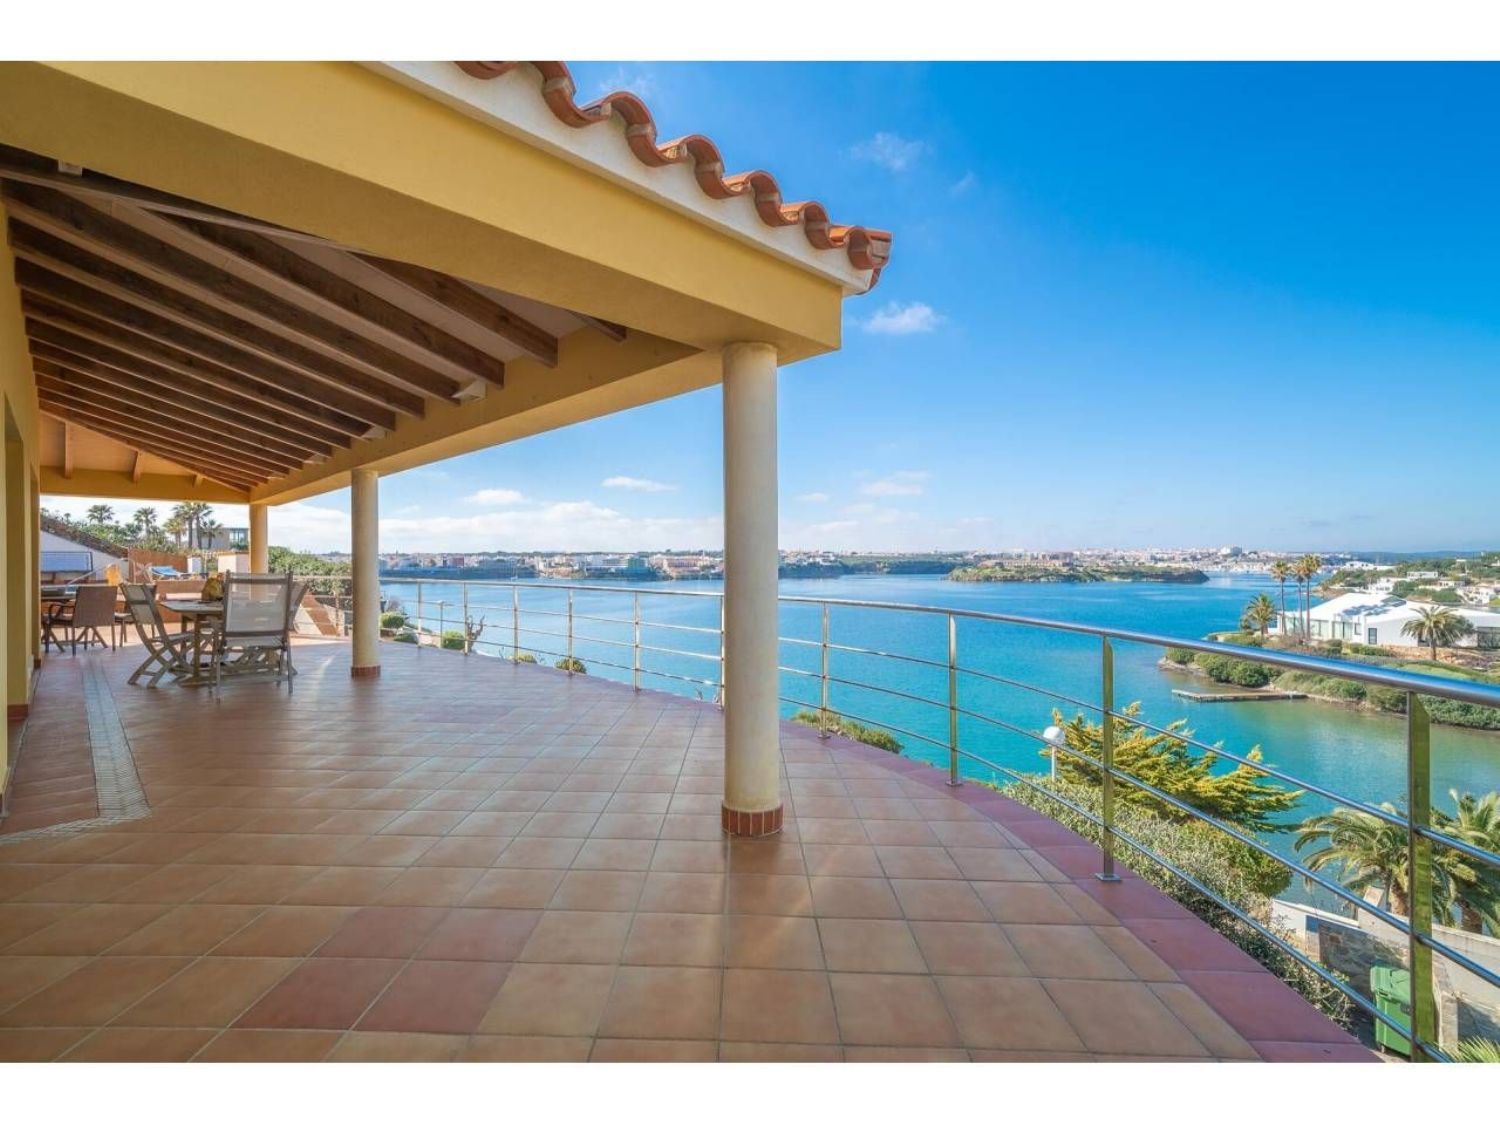 Villa for sale on the seafront in Cala Llonga, in Maó